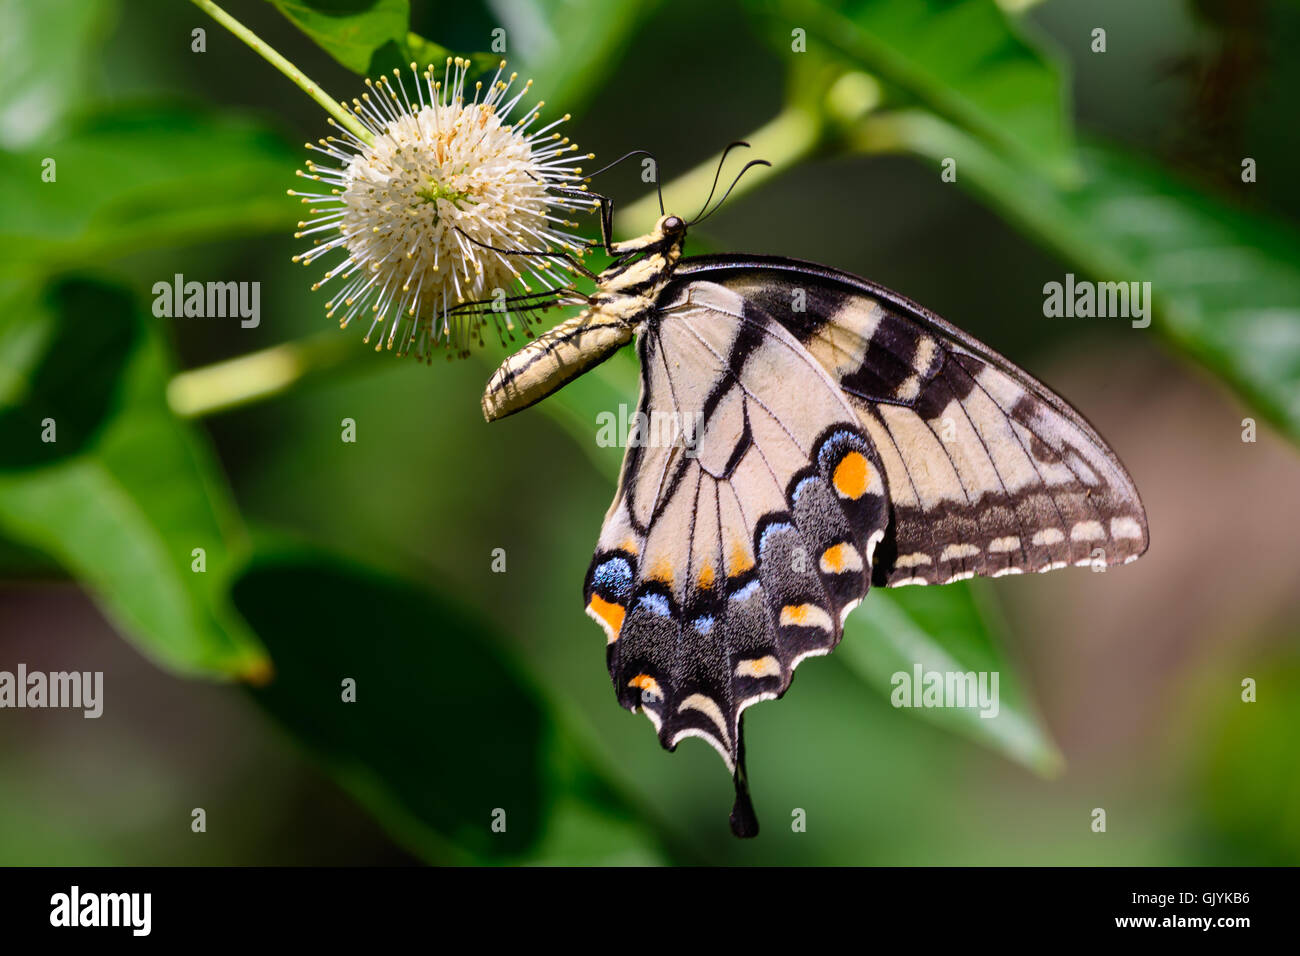 Eastern tiger swallowtail (Papilio glaucus) butterfly on flower. blurred green background side view Stock Photo